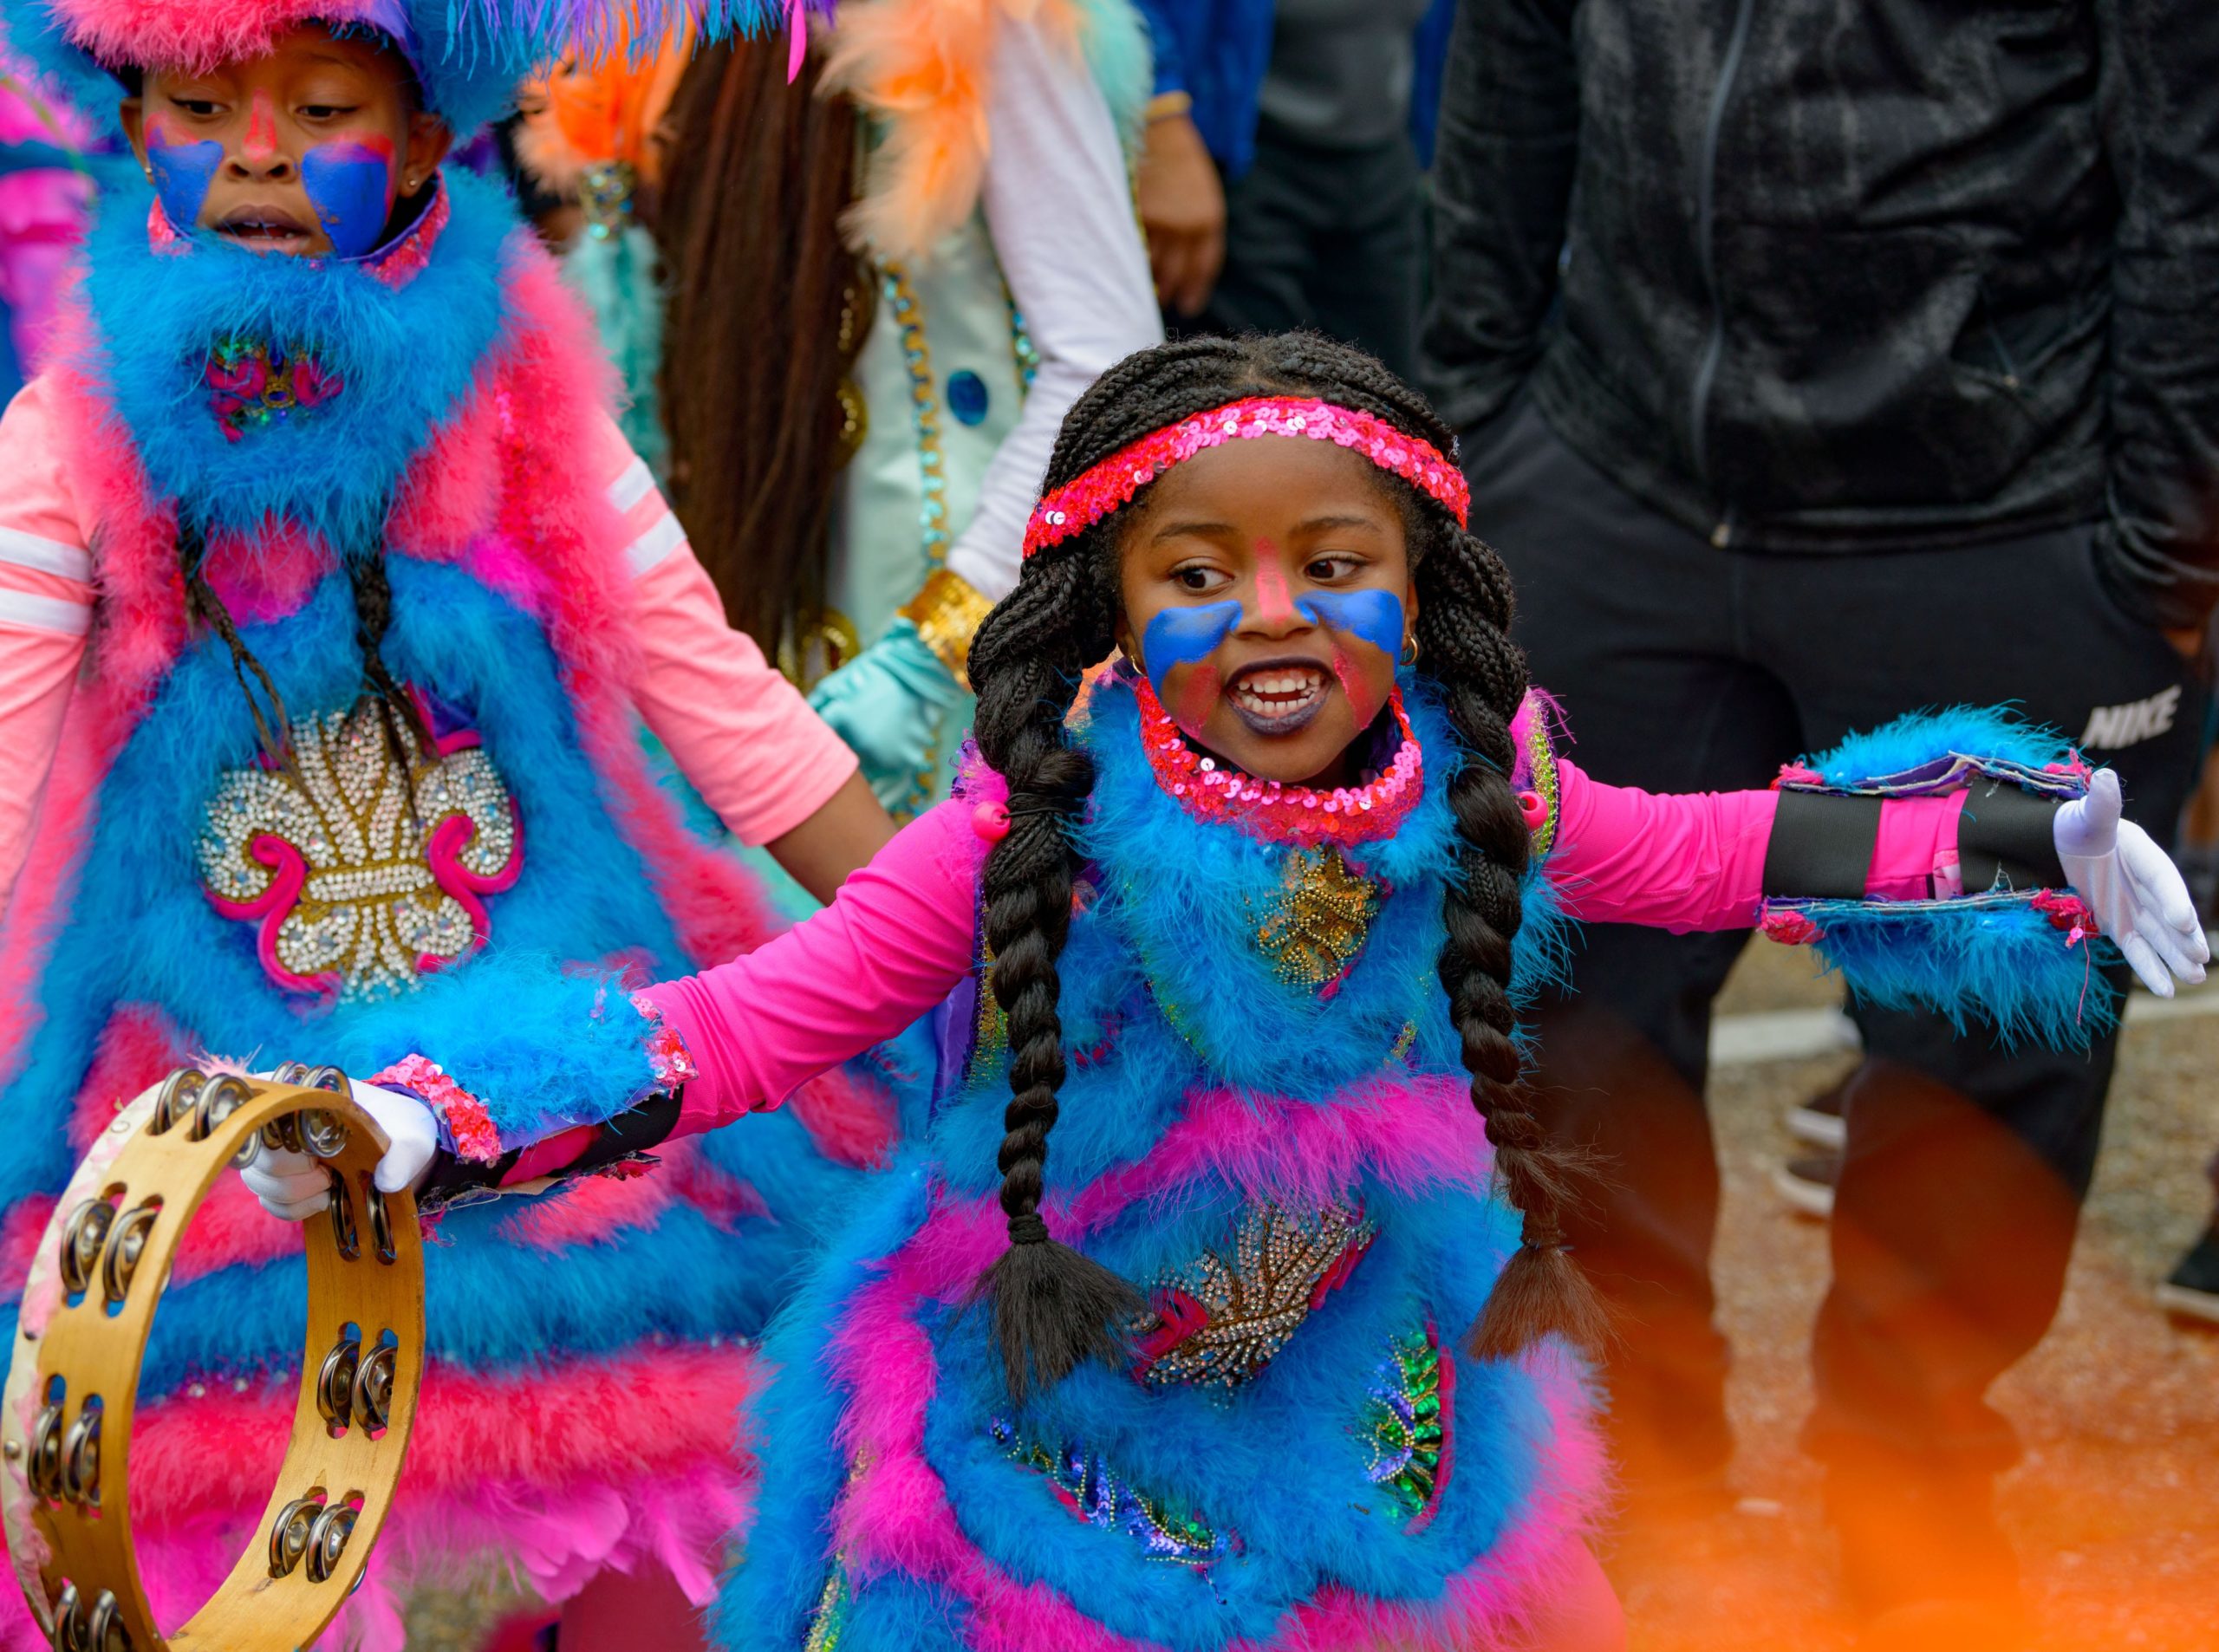 The Mohawk Hunters Mardi Gras Indians are one of the larger gangs or tribes seen on Super Sunday, March 17, 2019, in New Orleans, La. Photo by Matthew Hinton